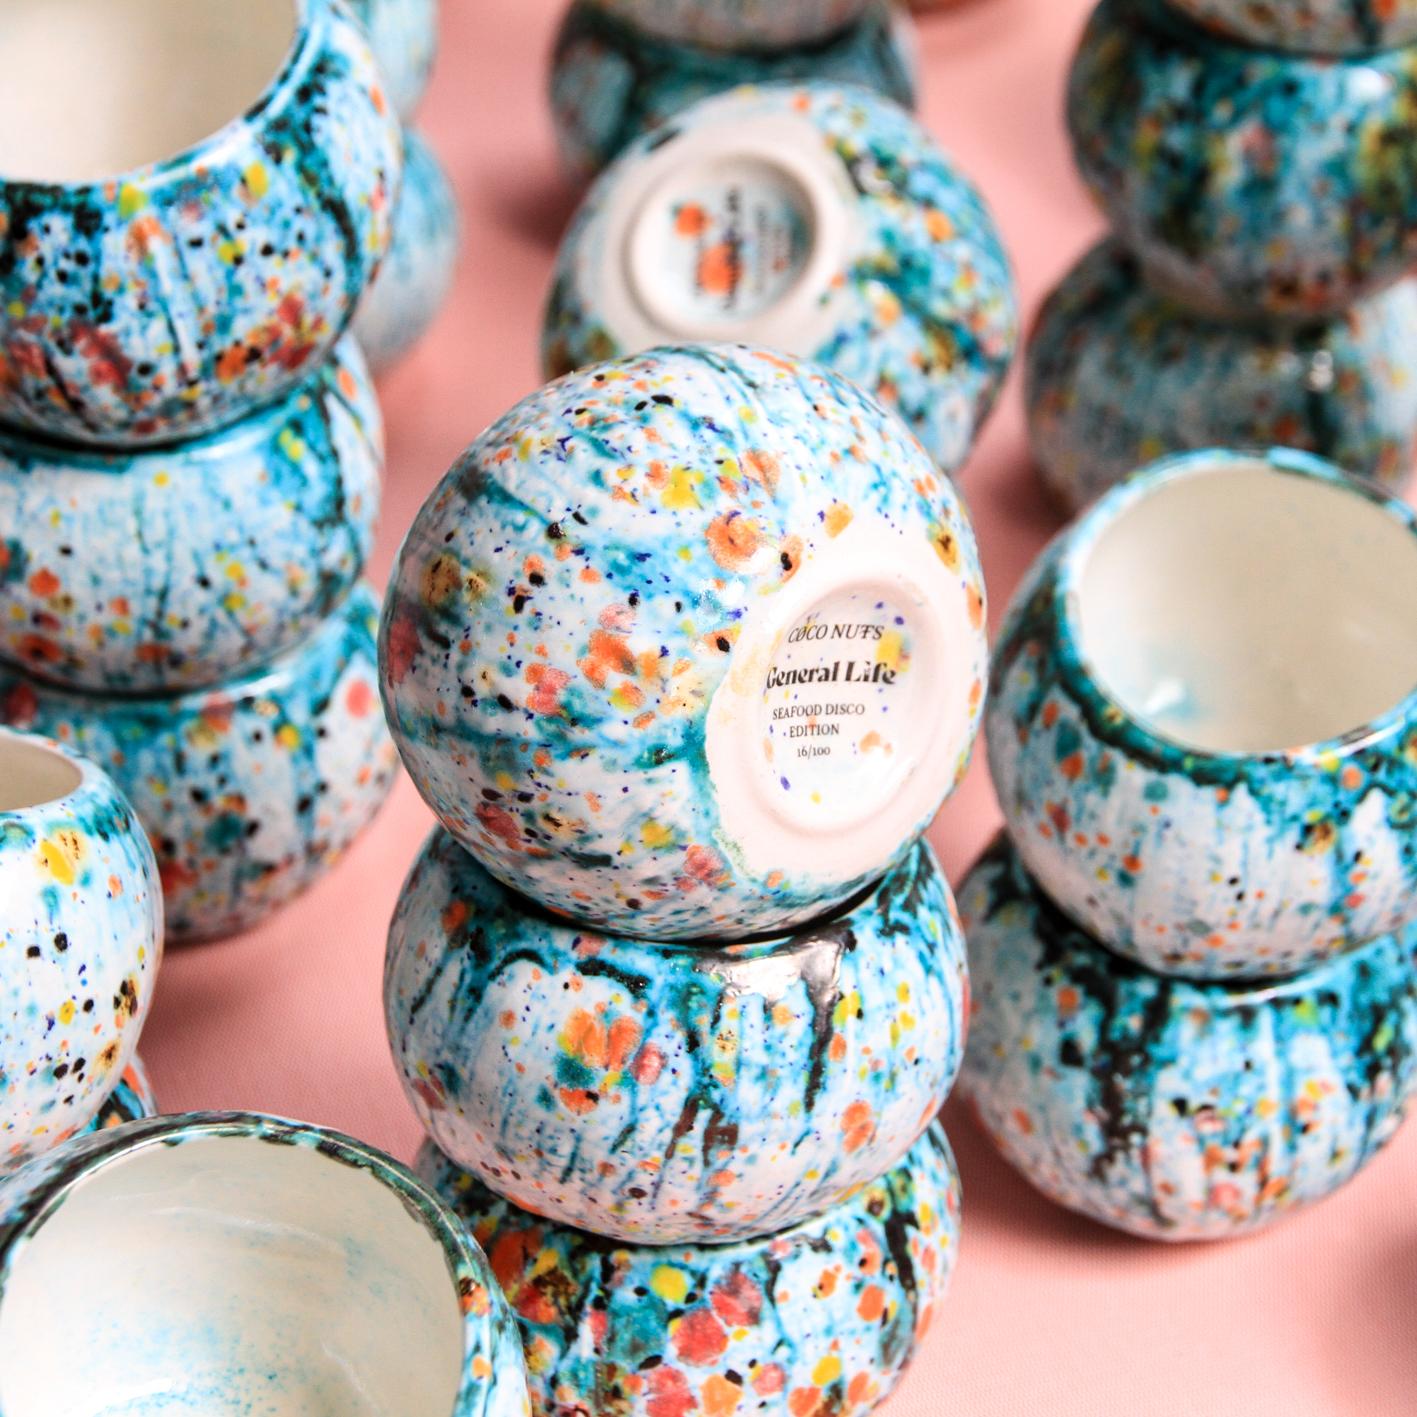 Out of a period of joyful exuberance General Life have created a new limited edition of just 100 of their CØCO NUTS cups in a new ‘SEAFØØD DISCO’ glaze inspired by nougat, prawns, Art Nouveau, cheetahs and Argentinean street art. These are tactile